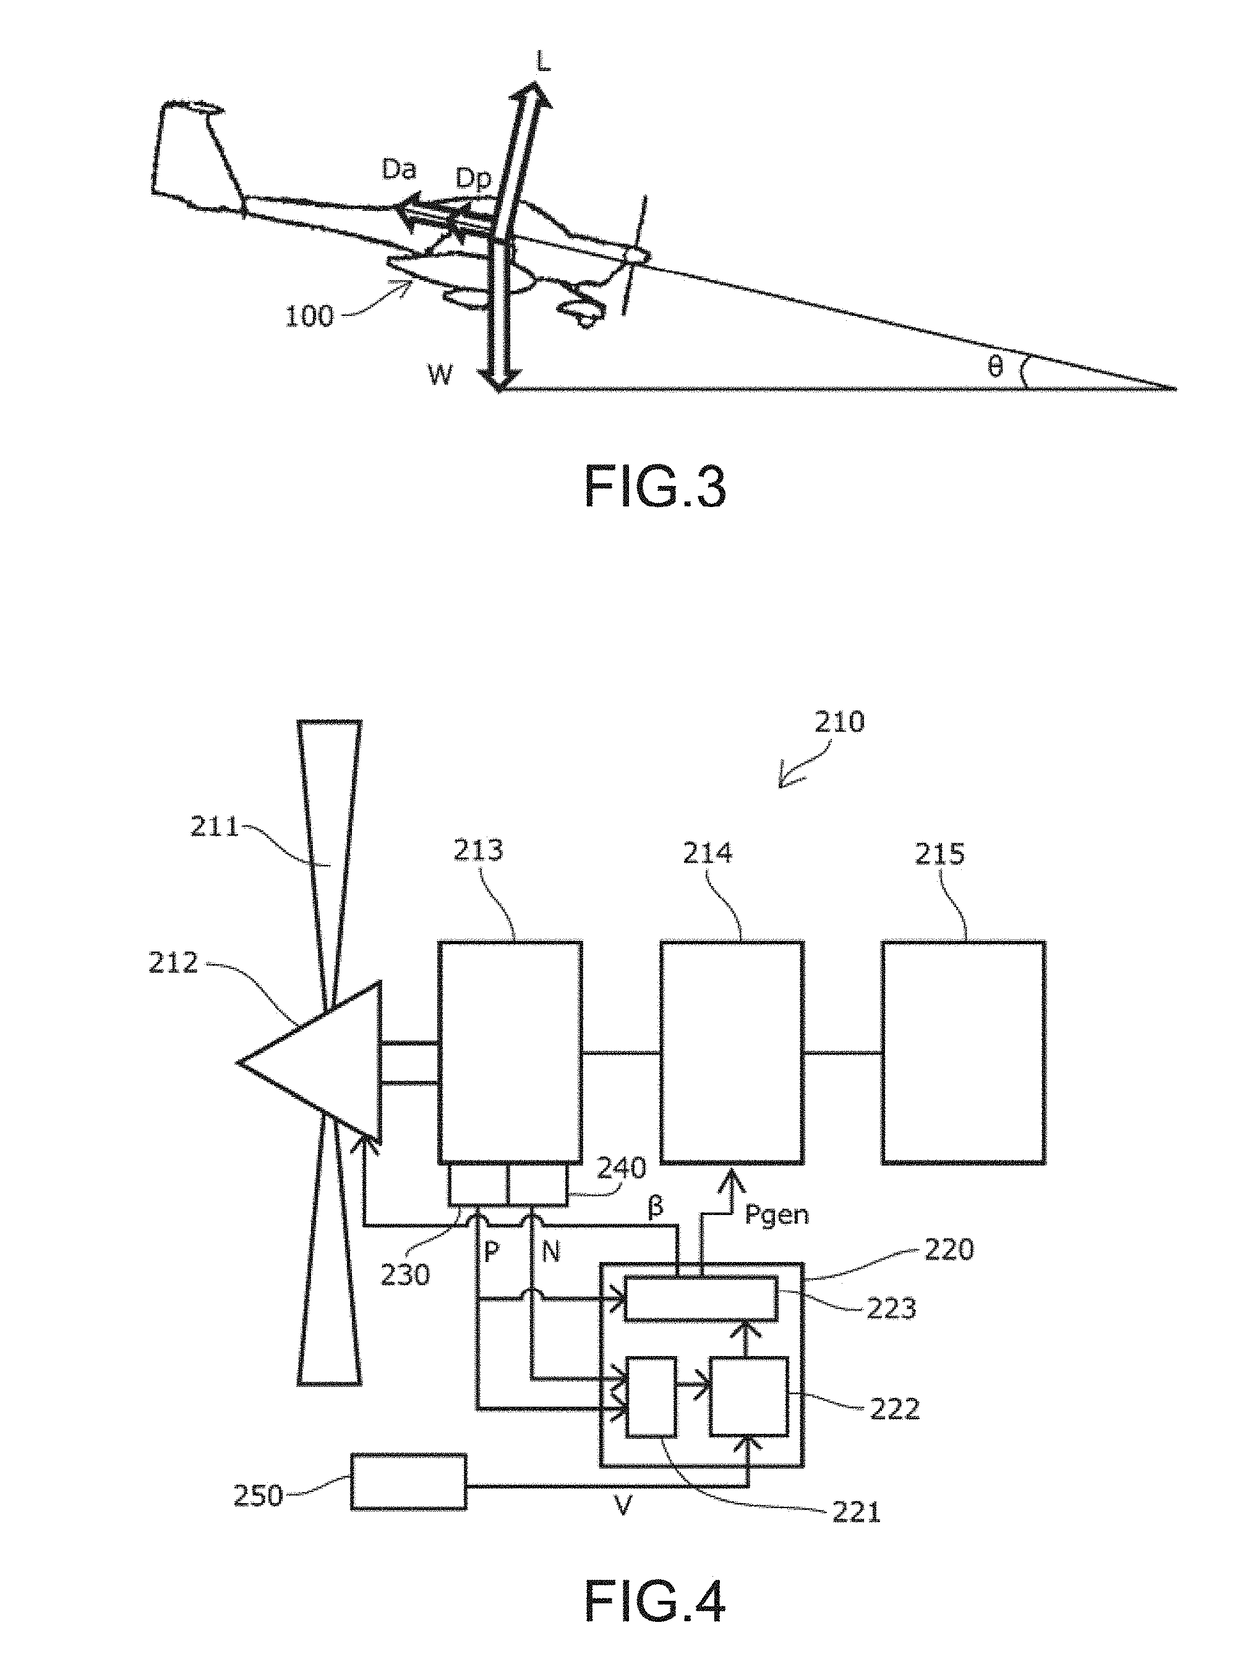 Electrified Aircraft and Method of Controlling Regenerative Electric Power of Electrified Aircraft